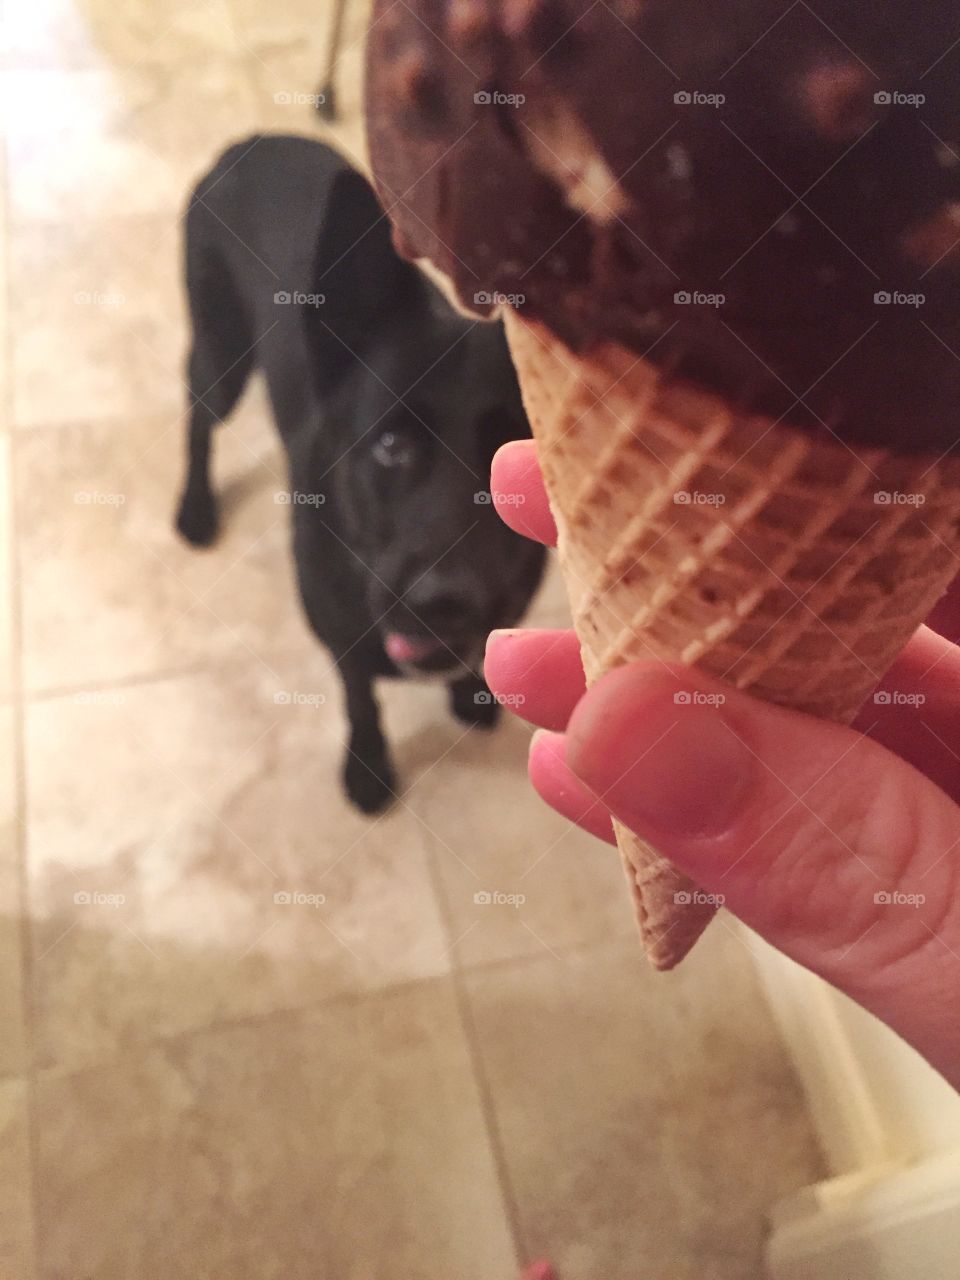 None for you. A dog begging for ice cream 